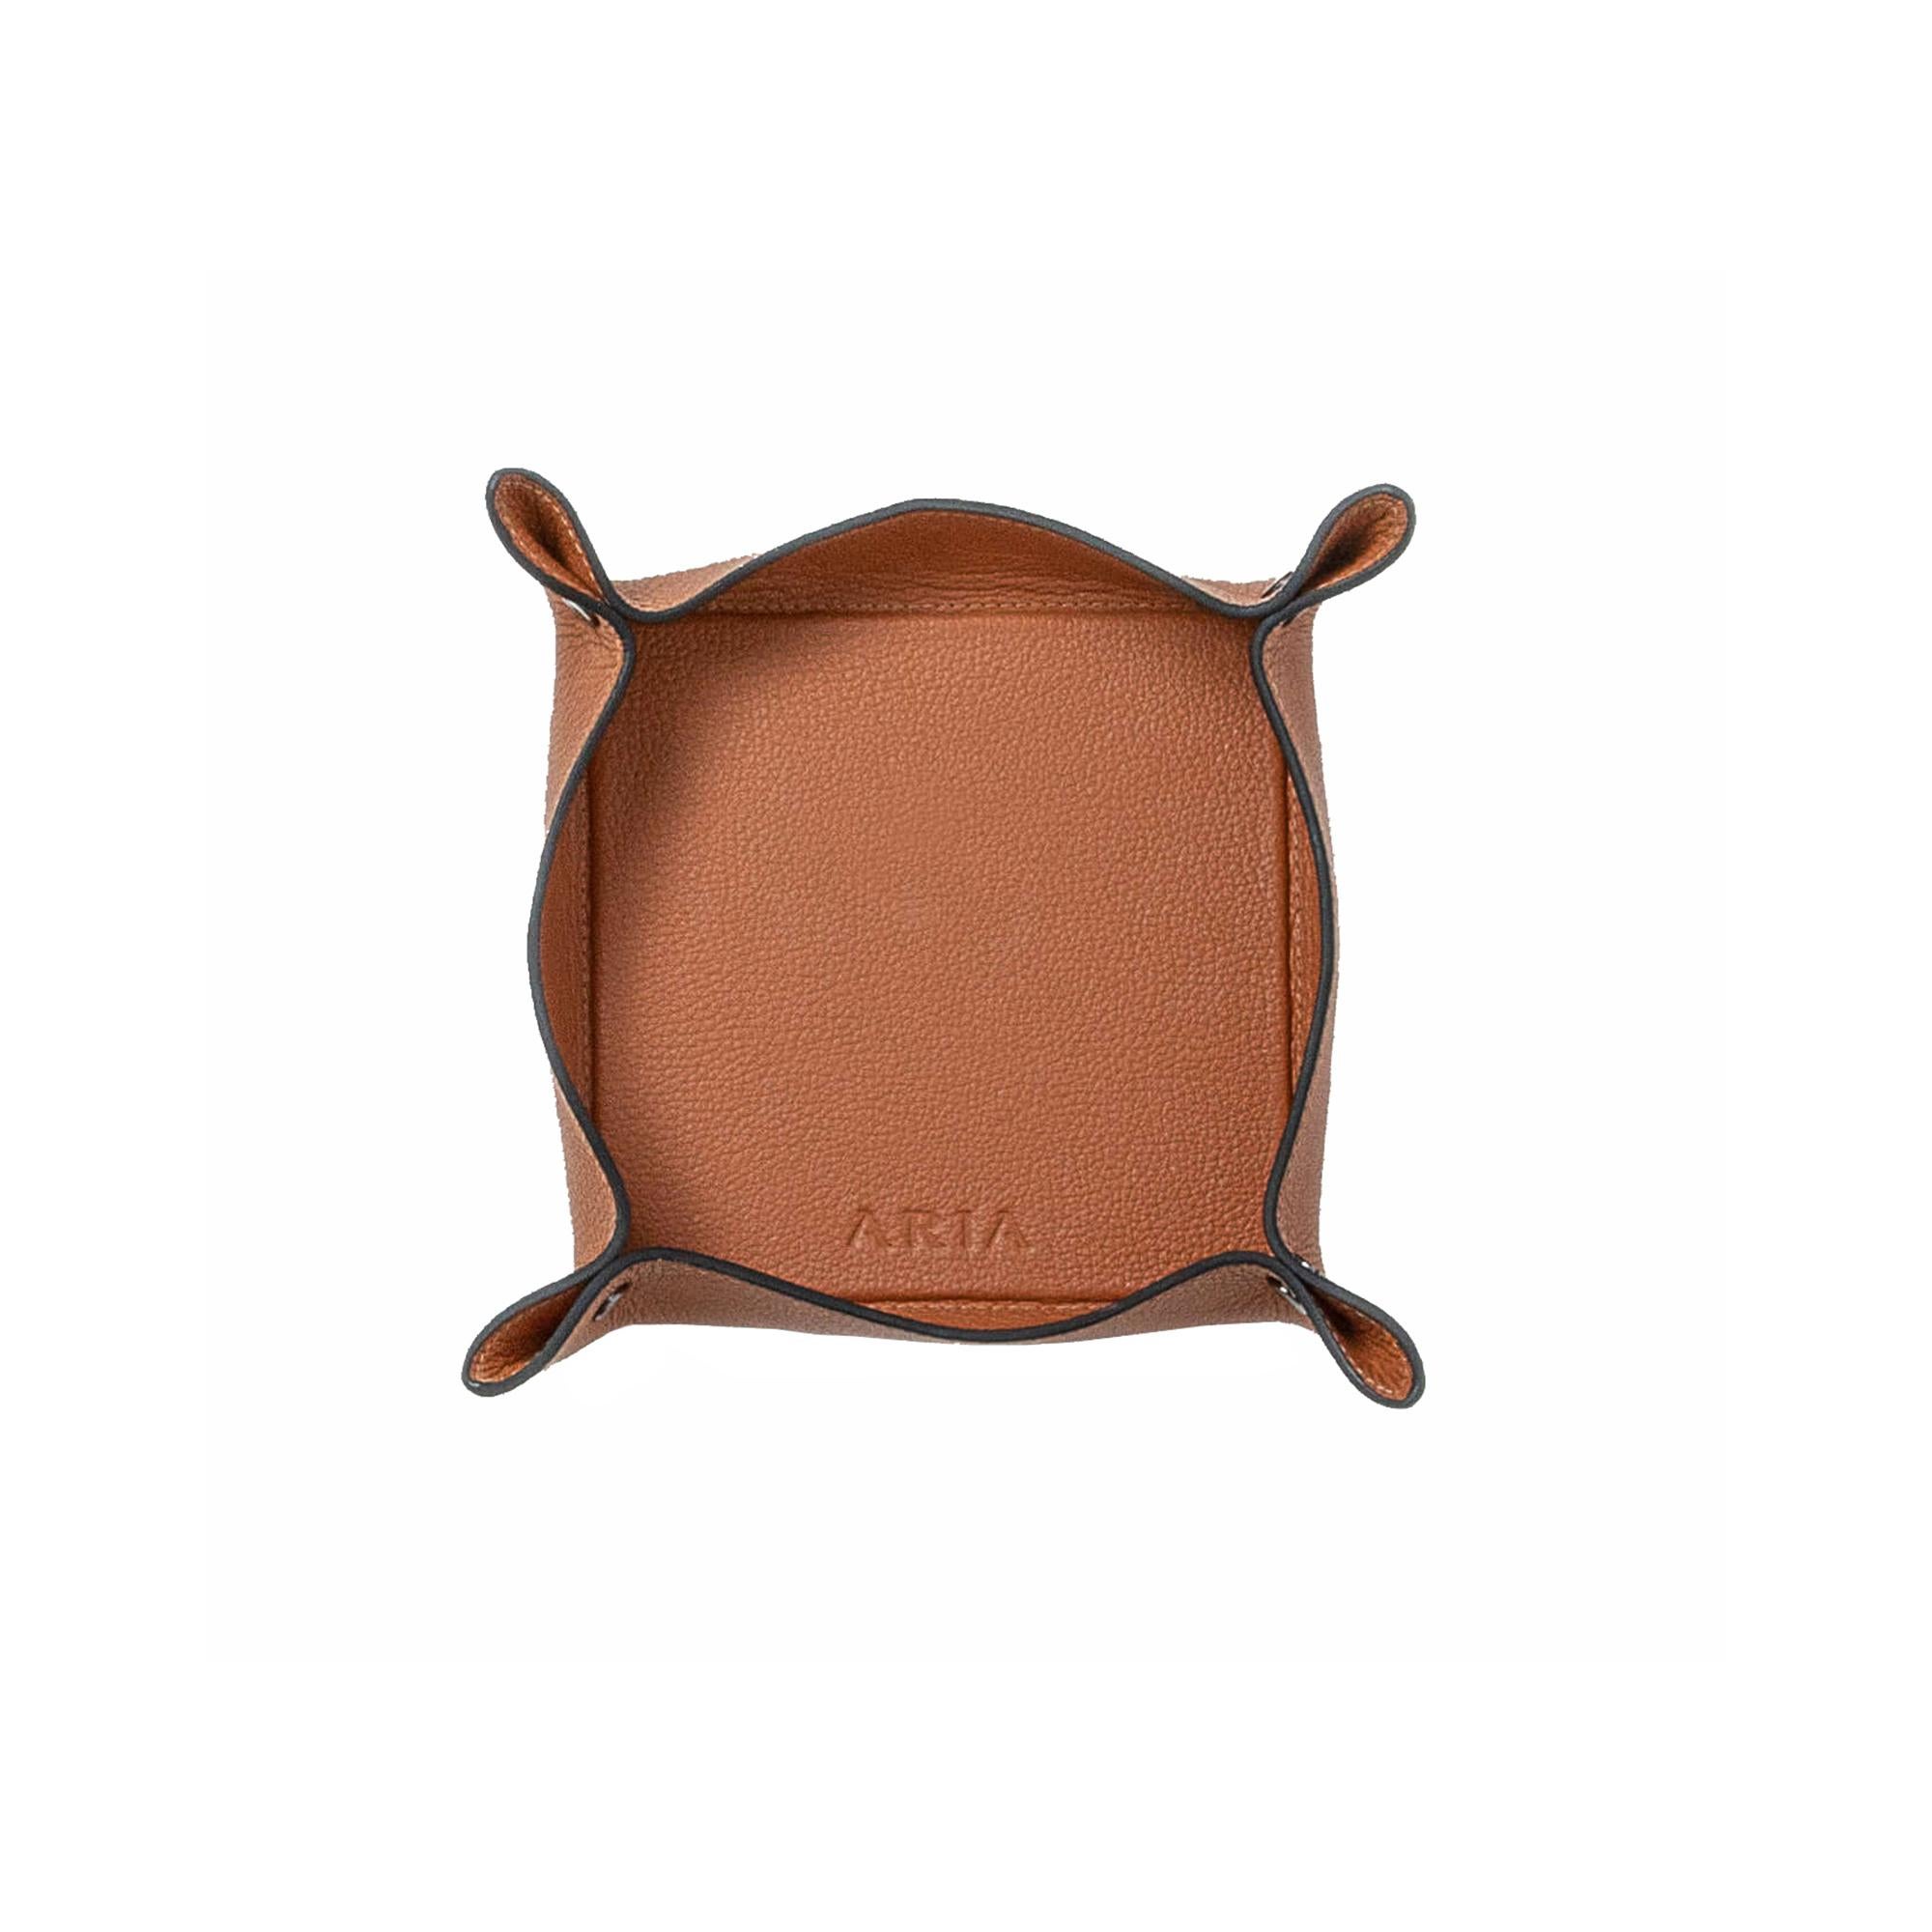 Modern Leather Trinket Tray - Small Square Object Holder - Handmade - Color: Savannah For Sale